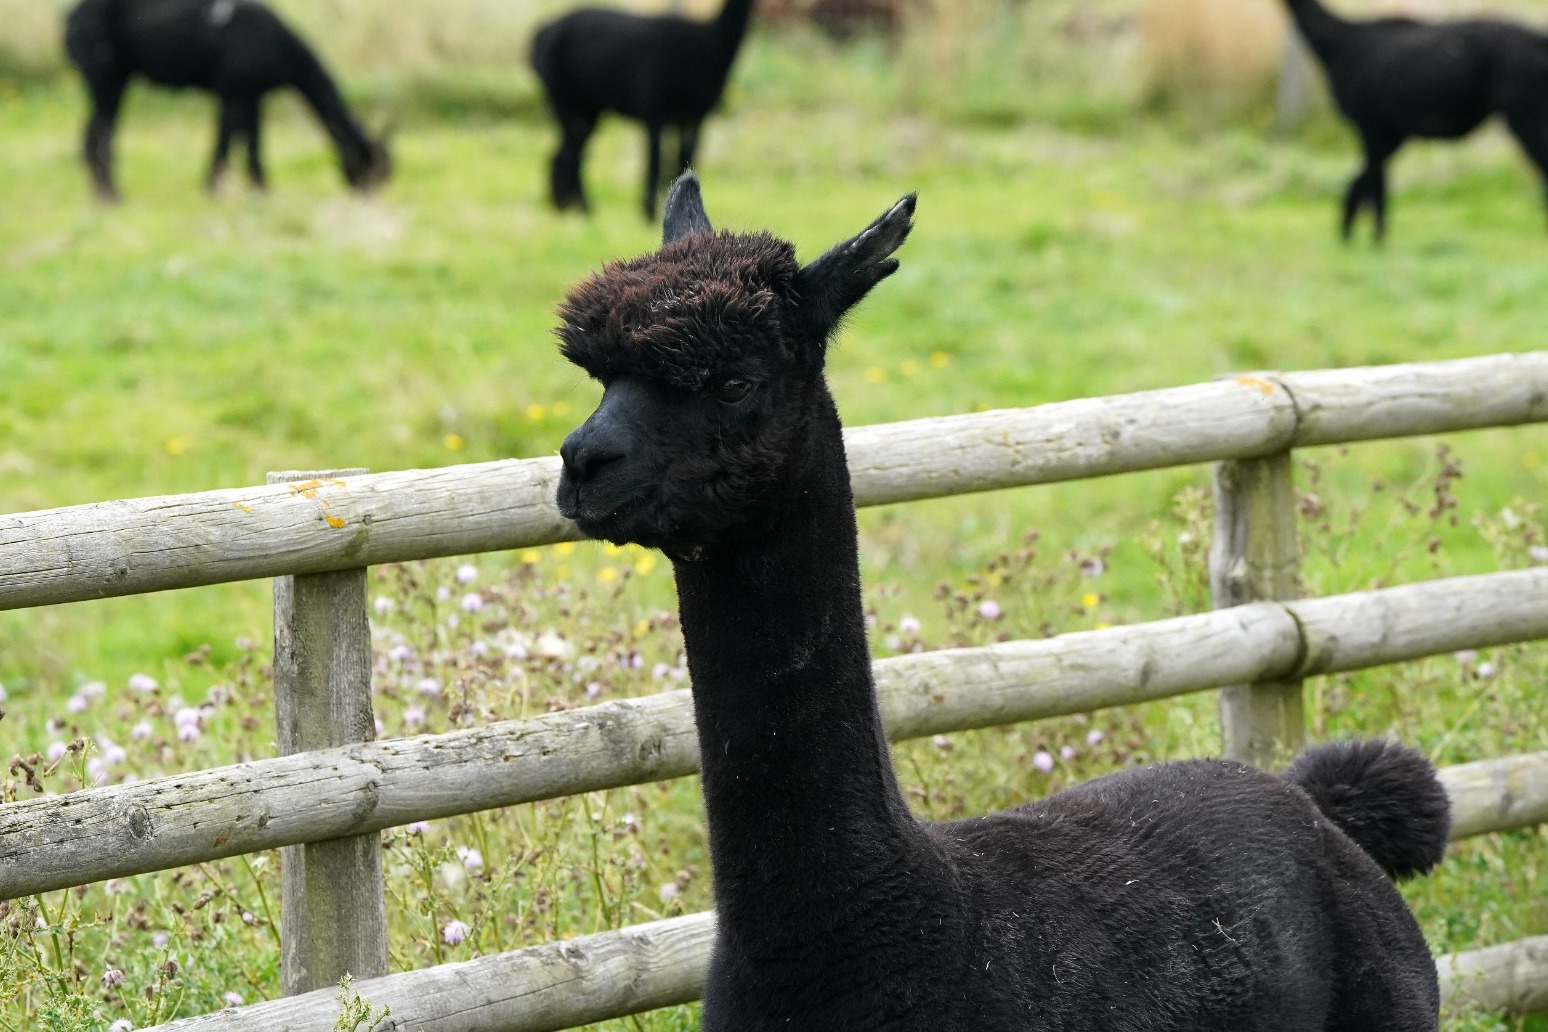 Alpaca experts condemn Government claims over Geronimo’s welfare 